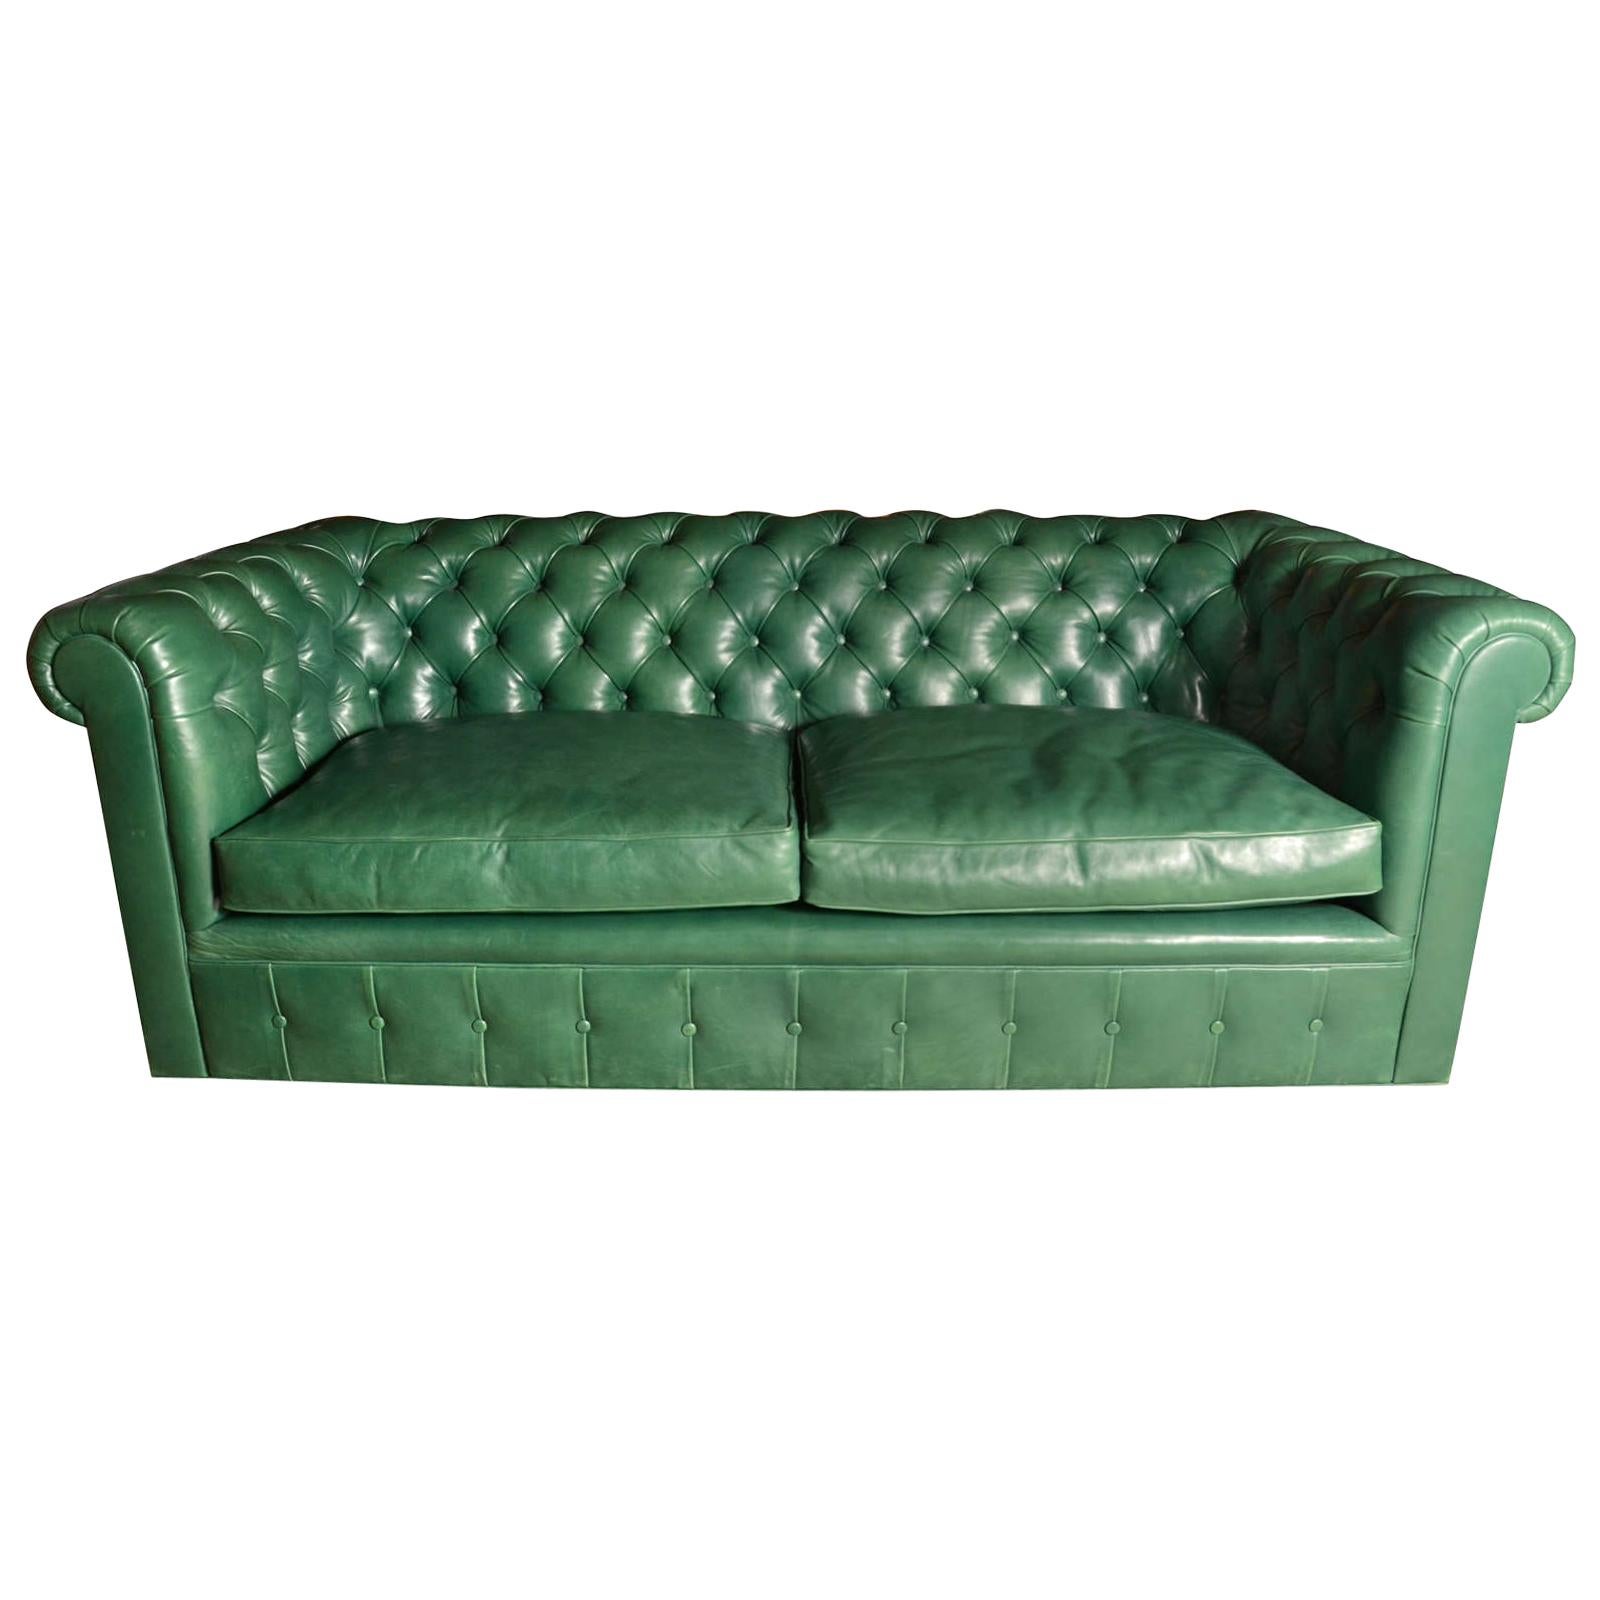 Emerald Green Midcentury Chesterfield Sofa from England